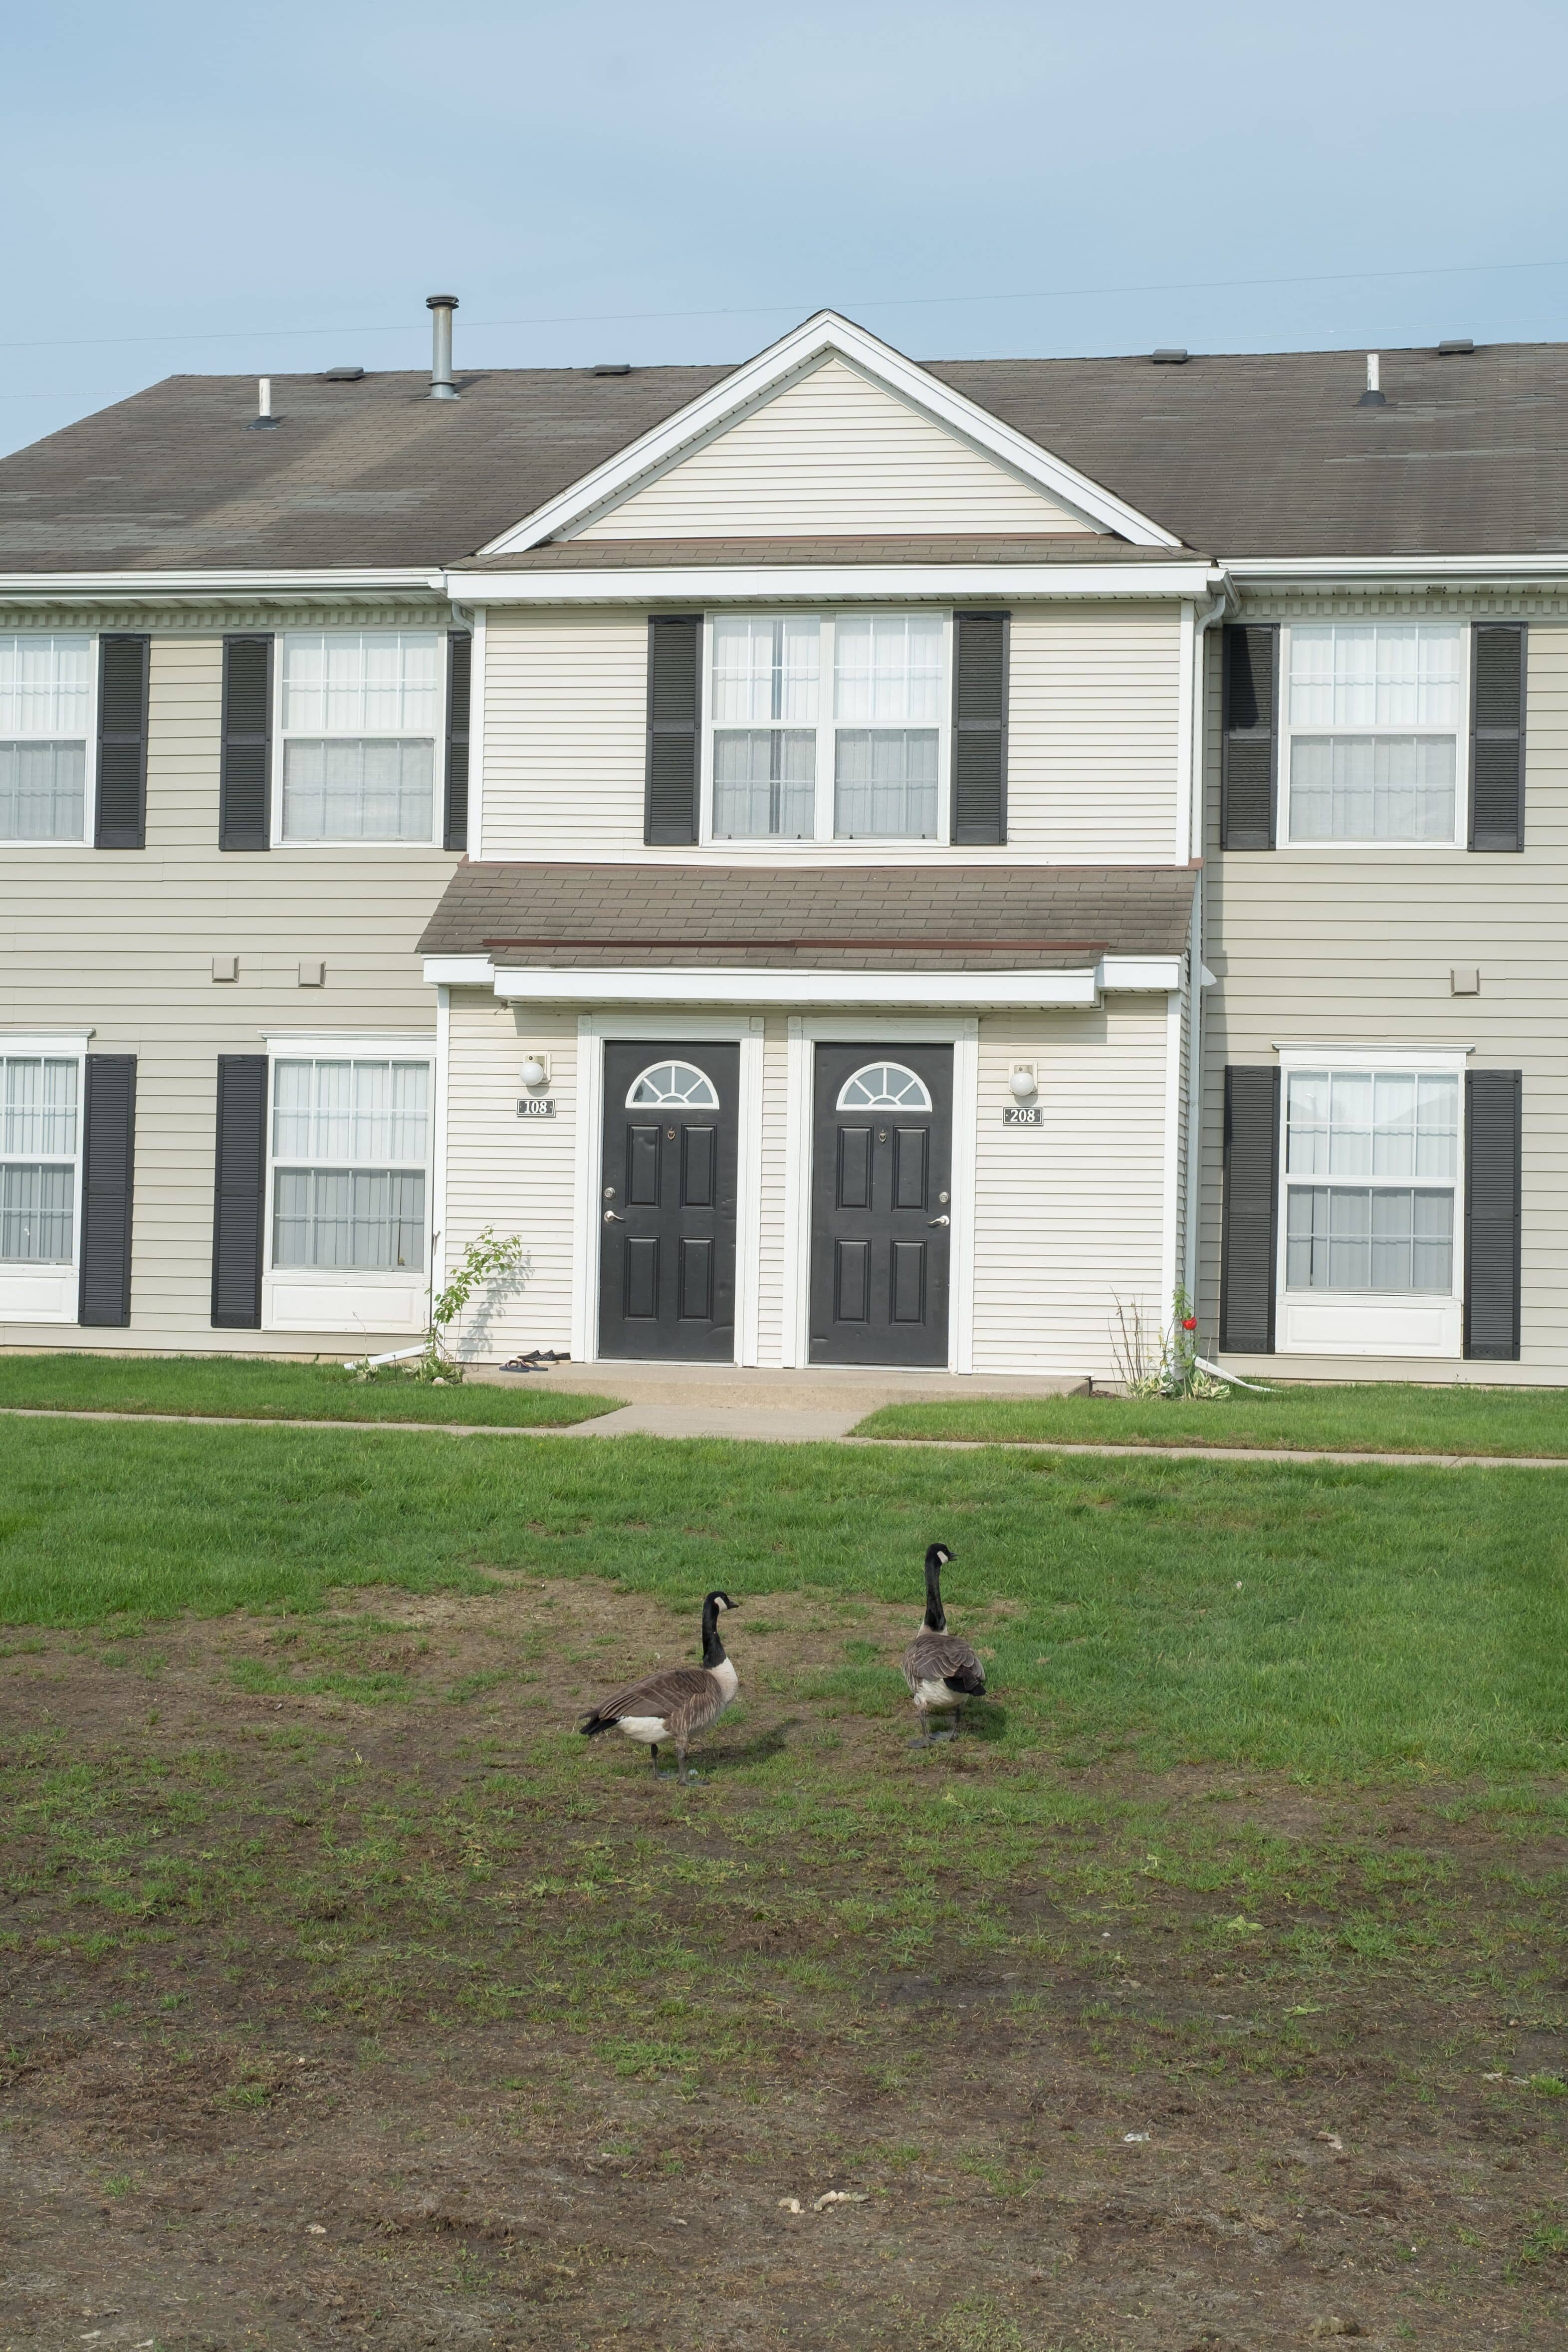 geese in front of house